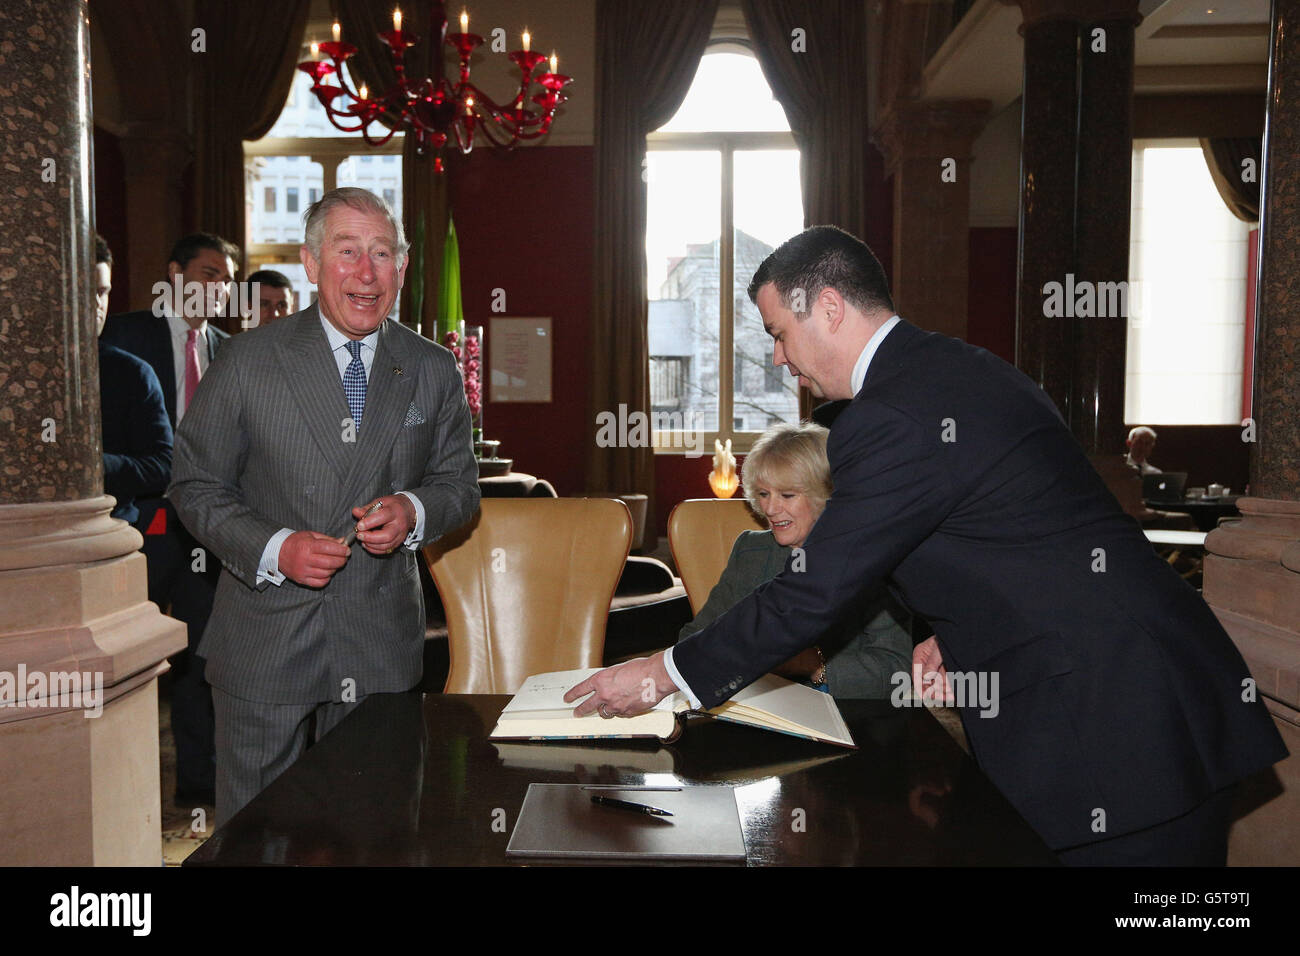 The Prince of Wales (left) laughs as The Duchess of Cornwall signs the visitors' book as the General Manager Kevin Kelly (right) looks on during a visit to the recently regenerated St Pancras Renaissance London Hotel adjacent to St Pancras International Station in London as they mark 150 years of London Underground. Stock Photo